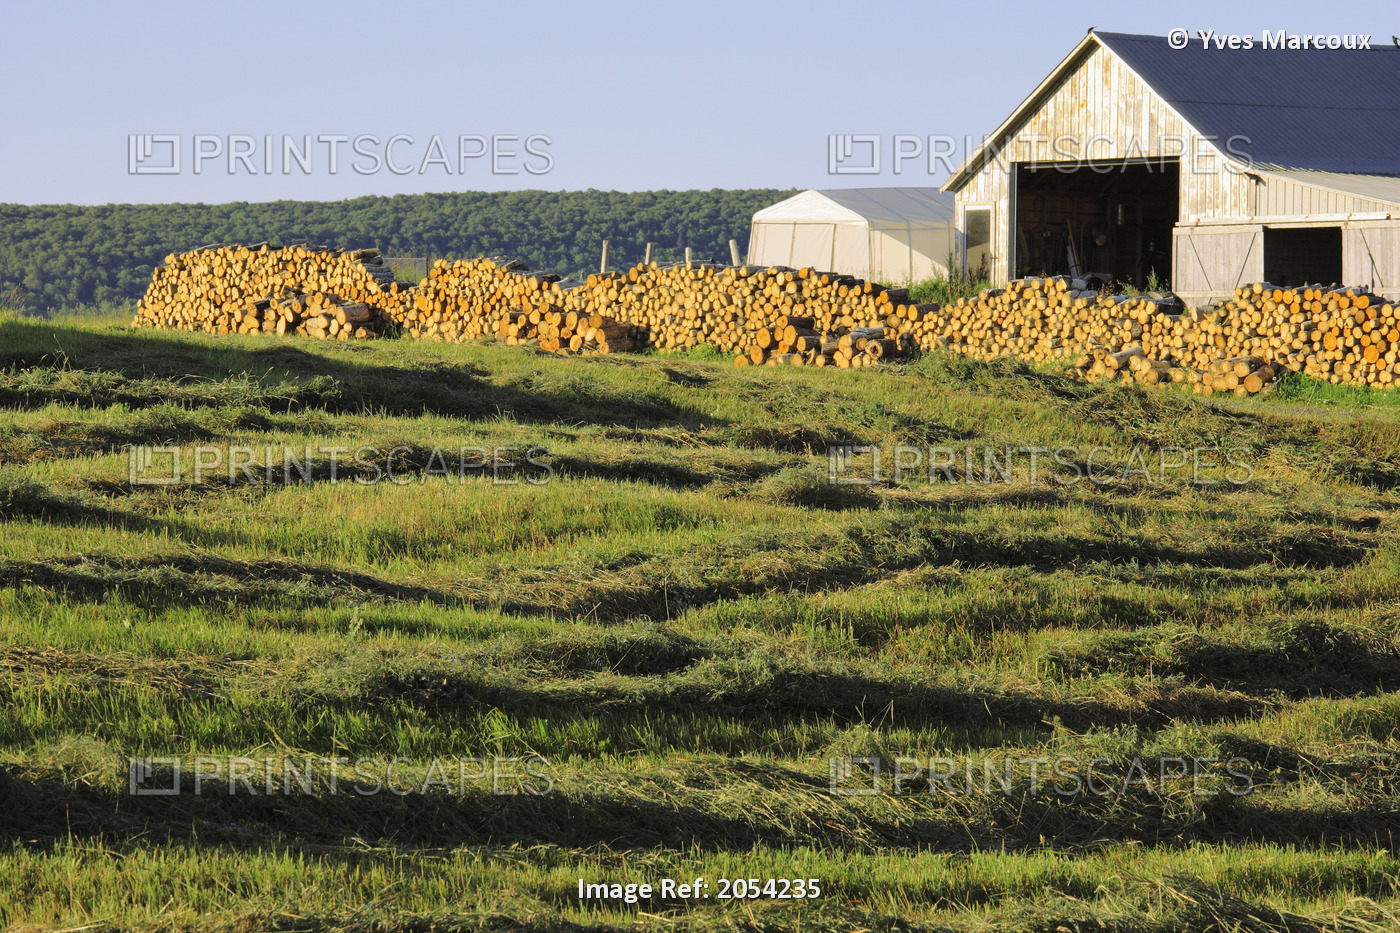 Artist's Choice: Fields, Shed And Stack Of Logs, Bas-Saint-Laurent Region, ...